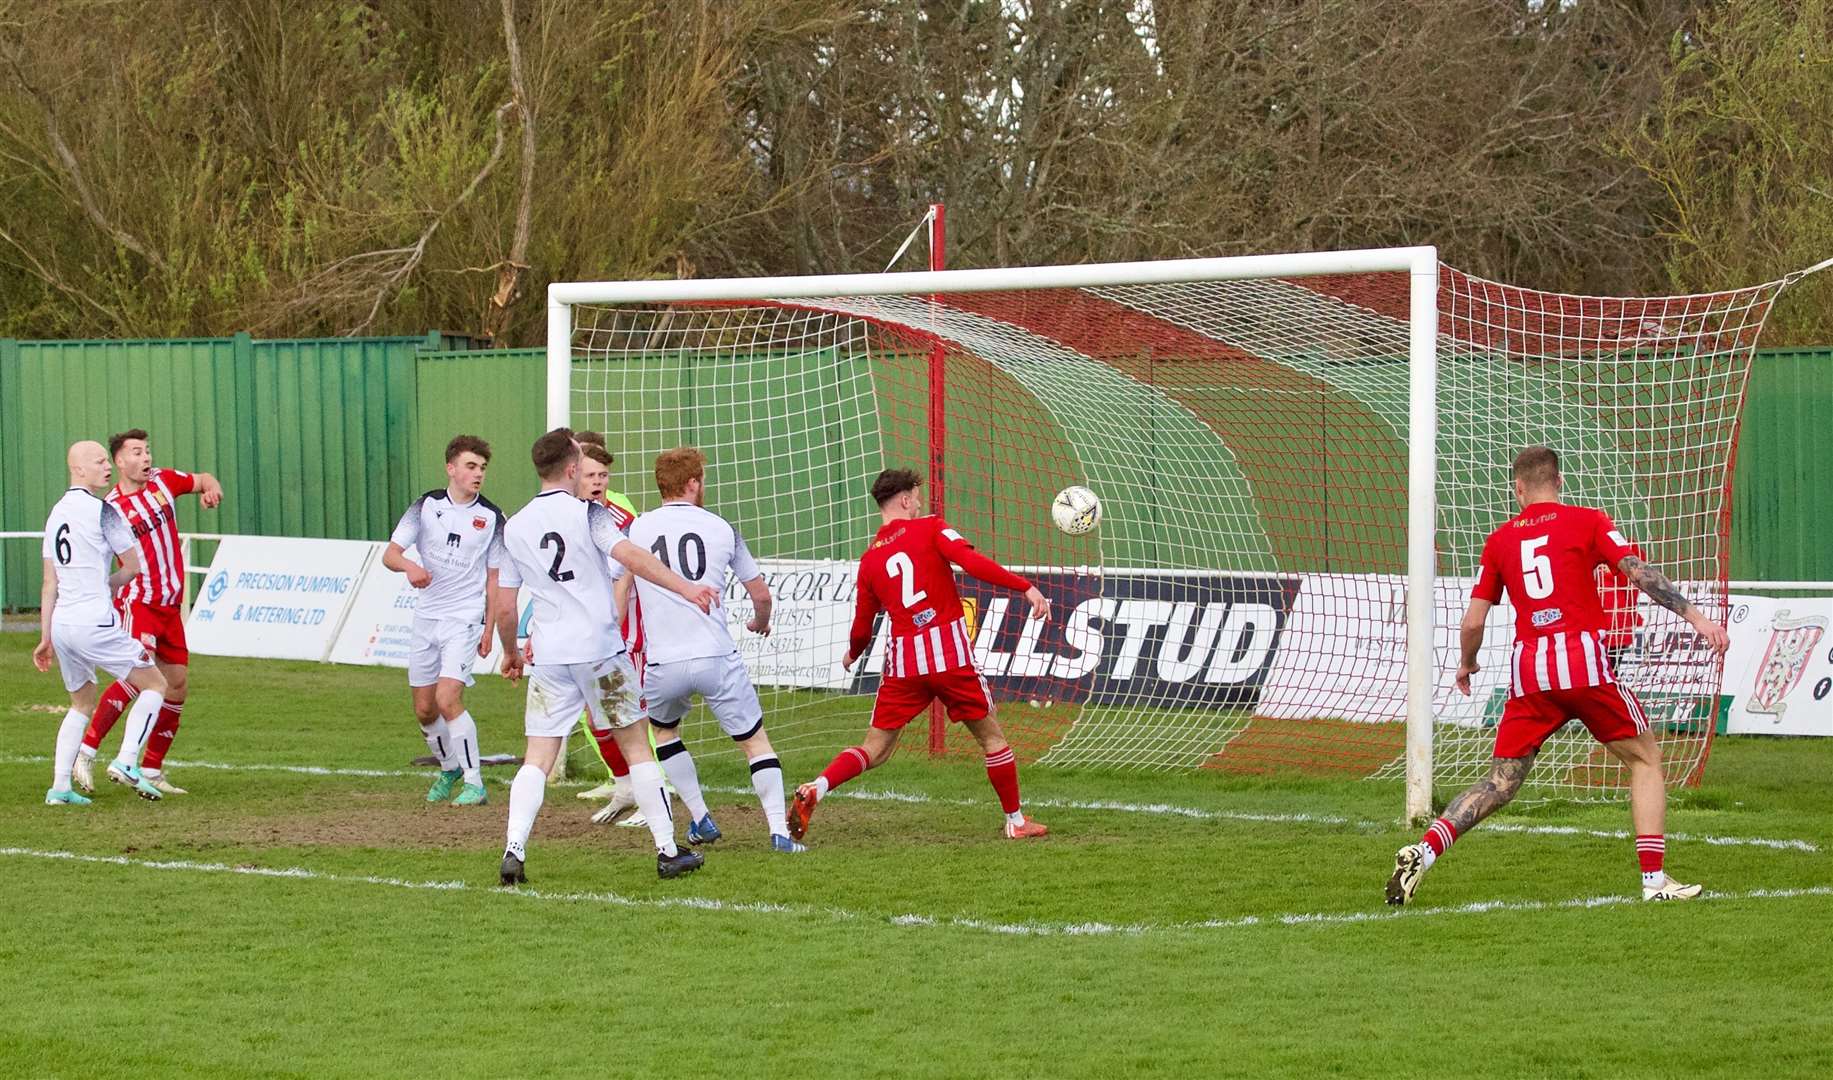 Formartine United claimed a solid home victory with a 6-1 win over Forres. Picture: Phil Harman